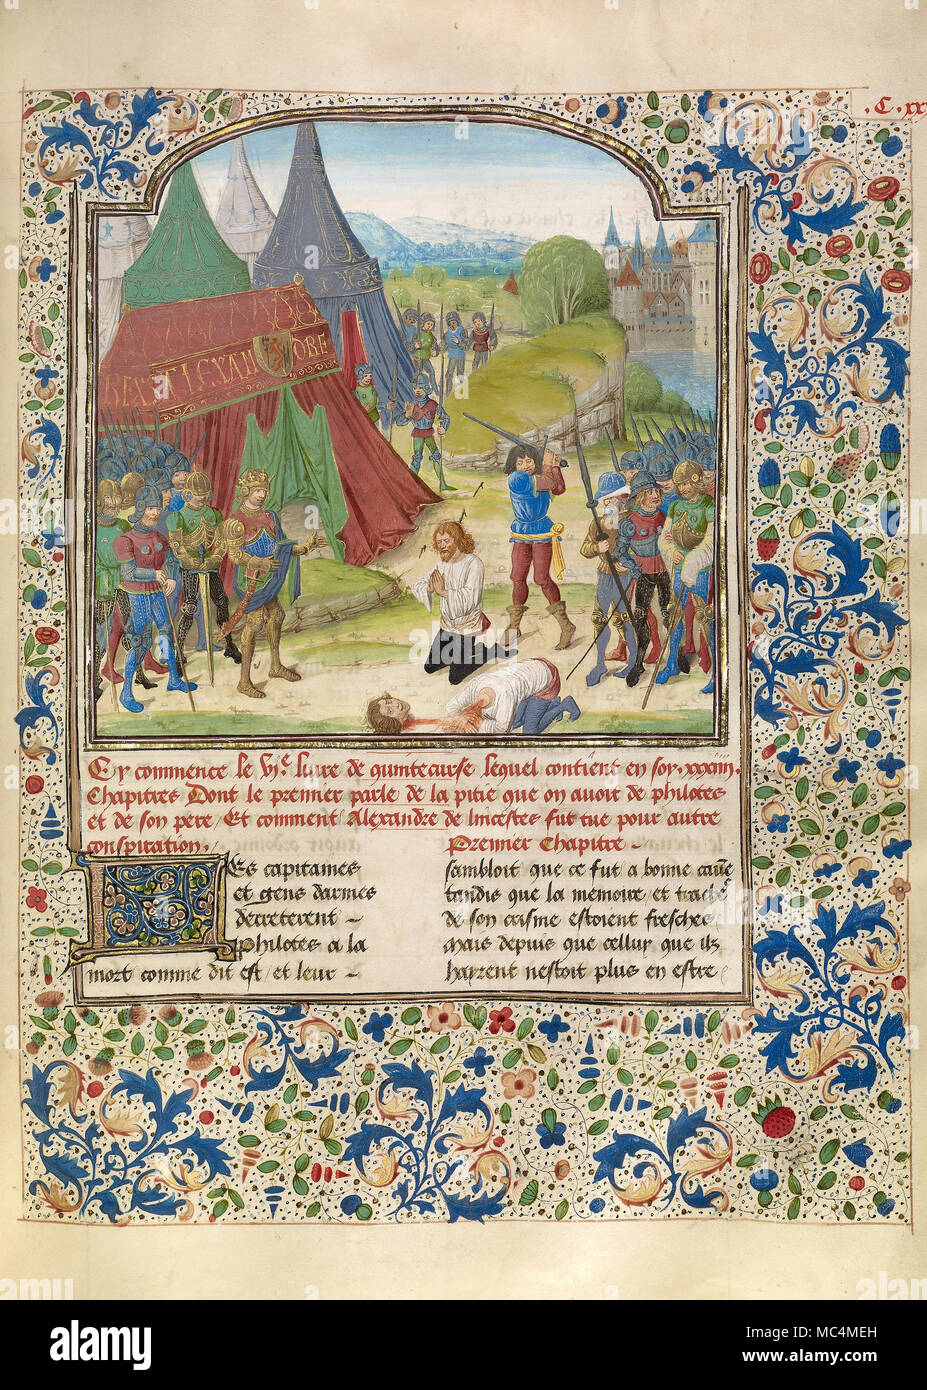 Master of the Jardin de Vertueuse - The Execution of Philotas. Circa 1470-1475. 'Tempera colors, gold leaf, gold paint, and ink on parchment. Getty Ce Stock Photo